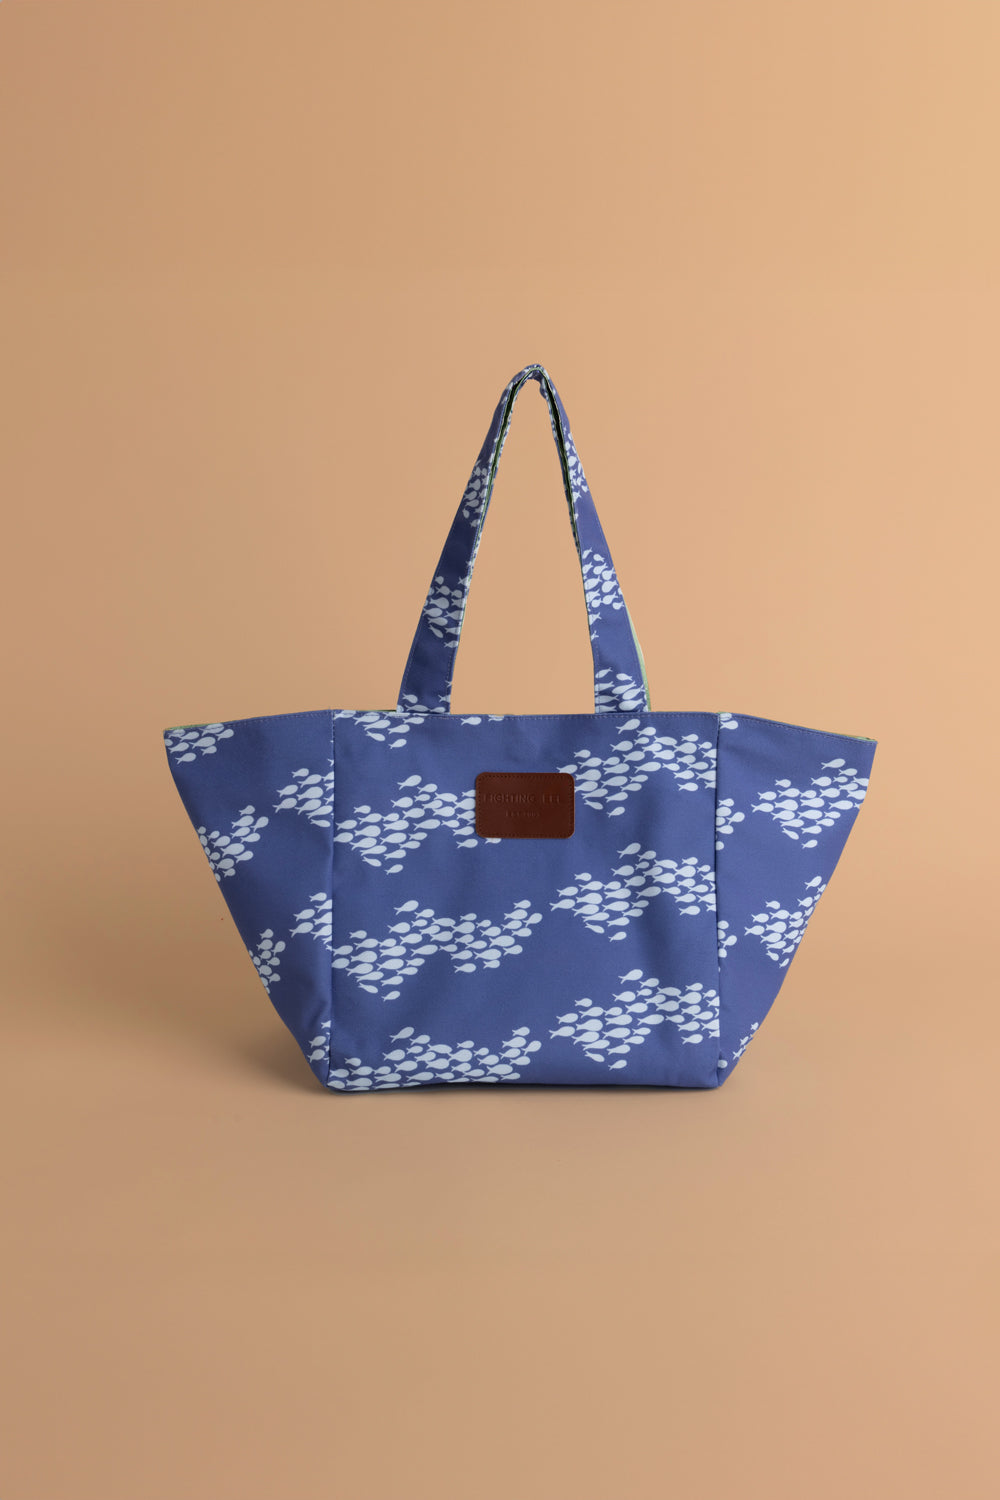 Let go We have fish to catch Tote Bag for Sale by Melcu